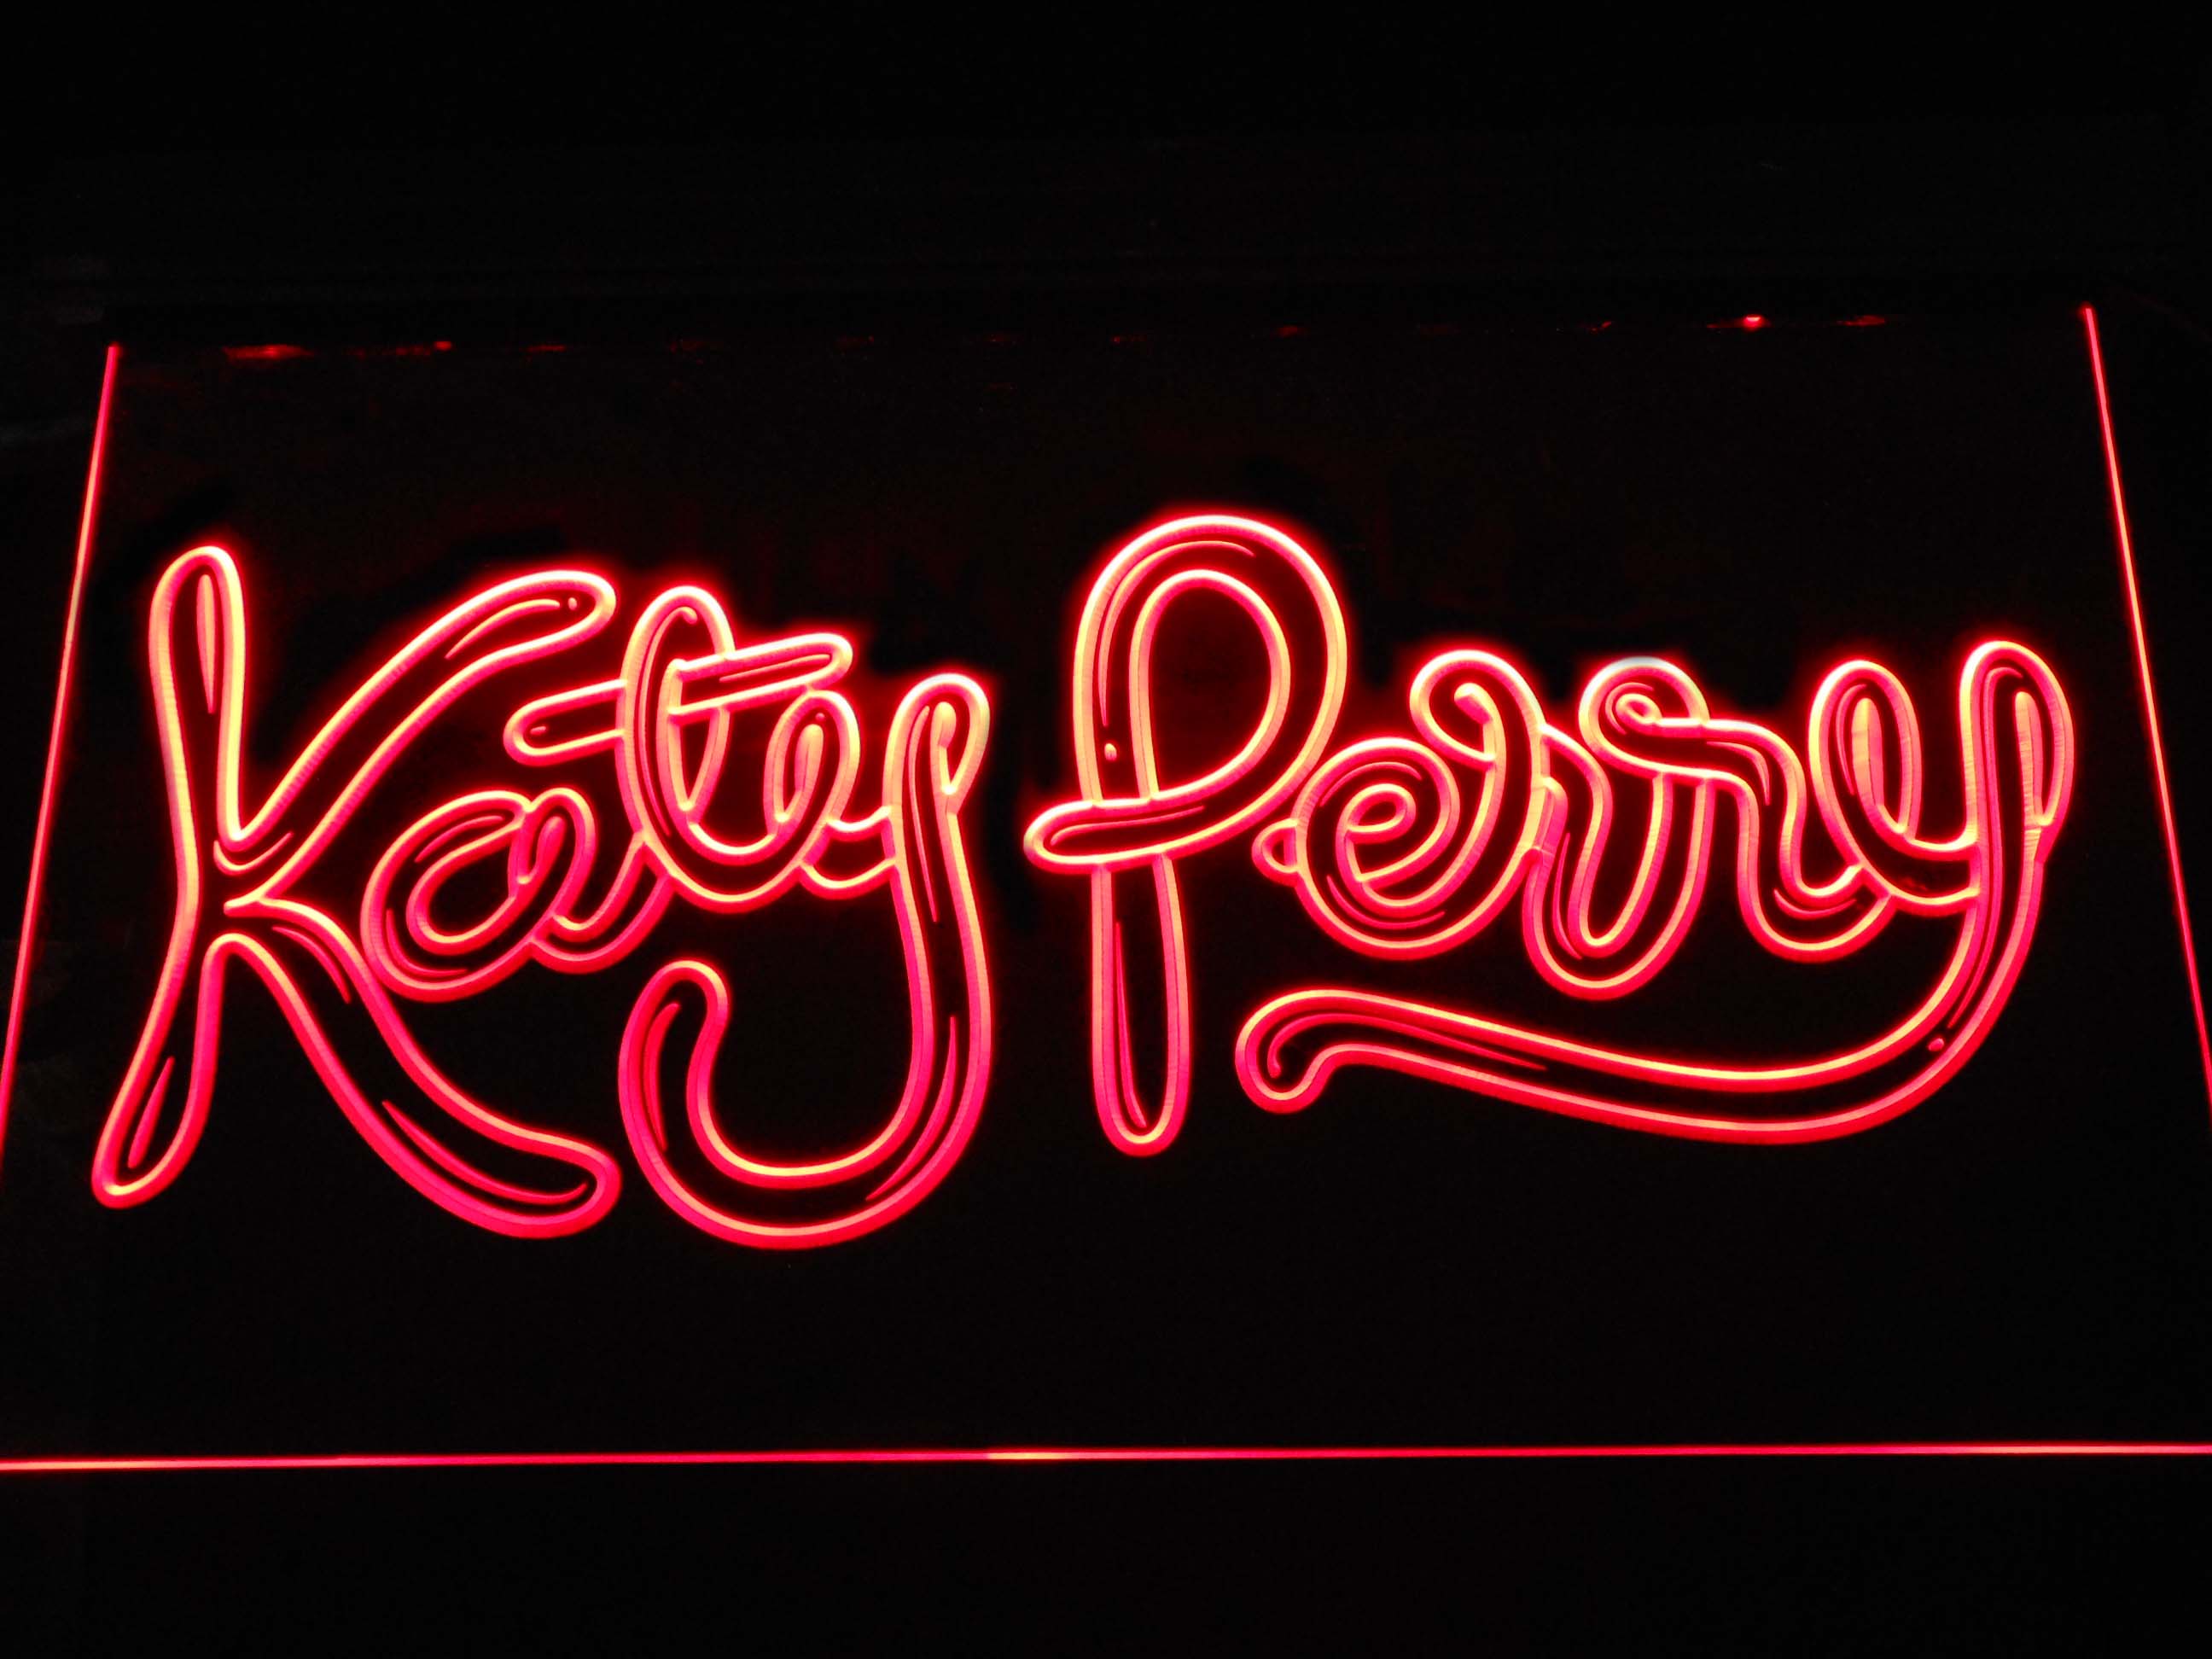 Katy Perry American Singer Neon Light LED Sign